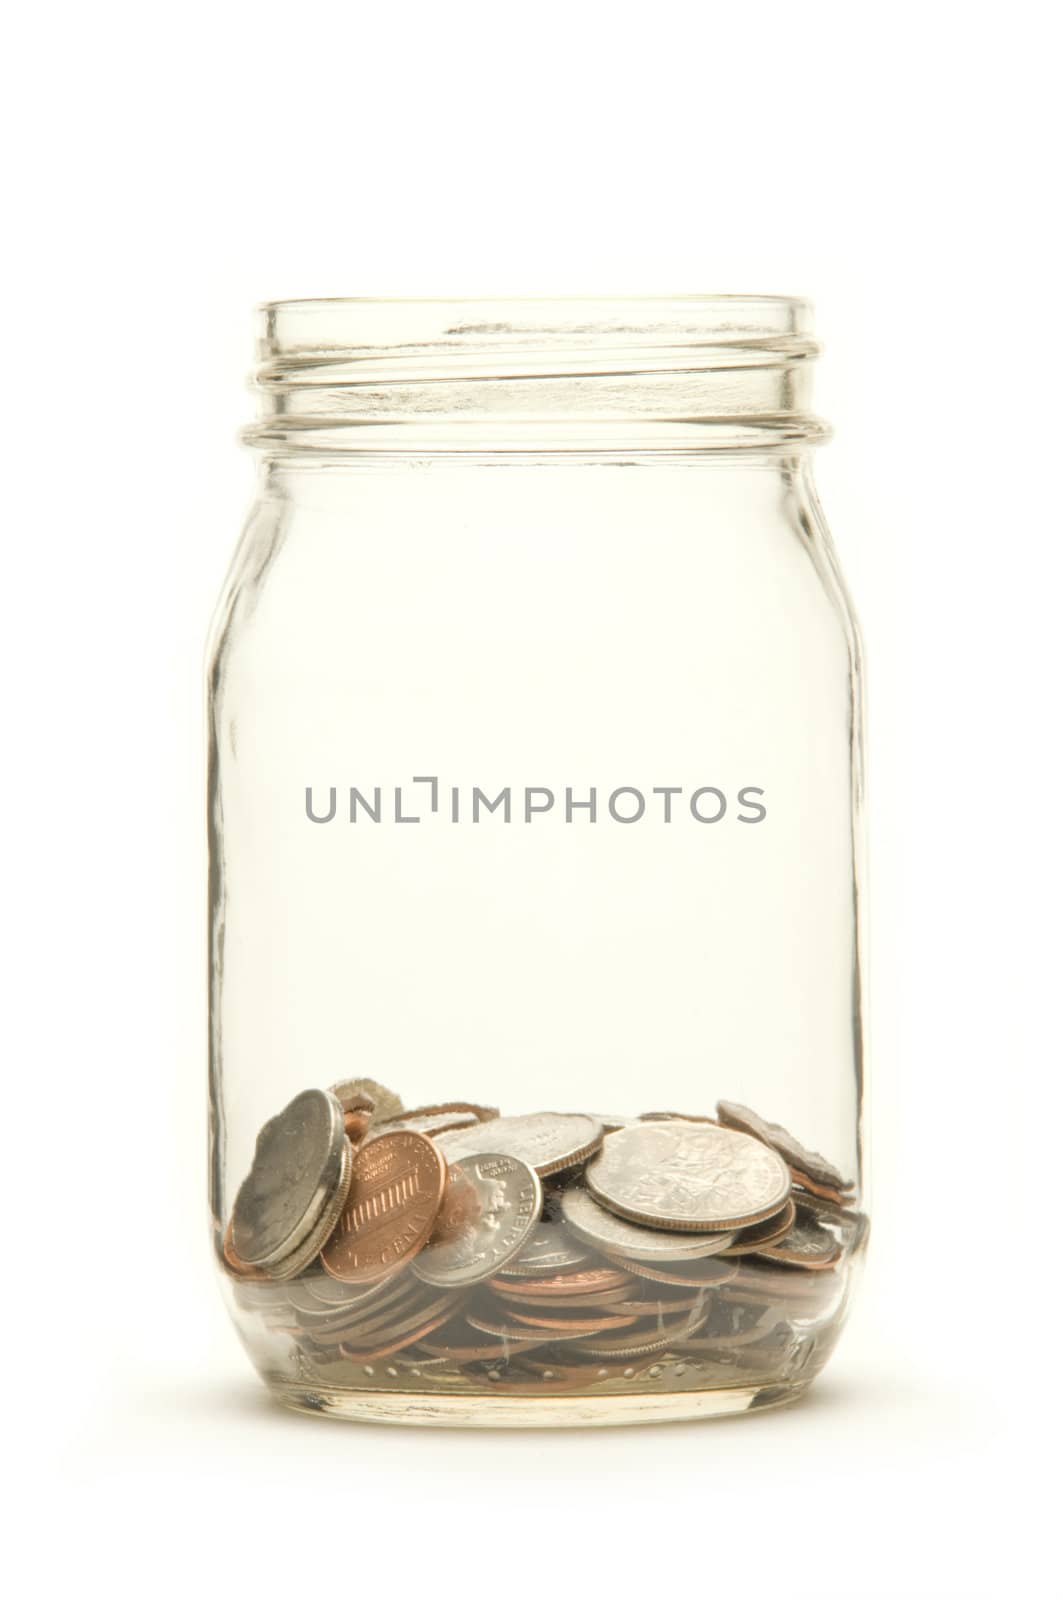 American coins in a glass jar against a white background